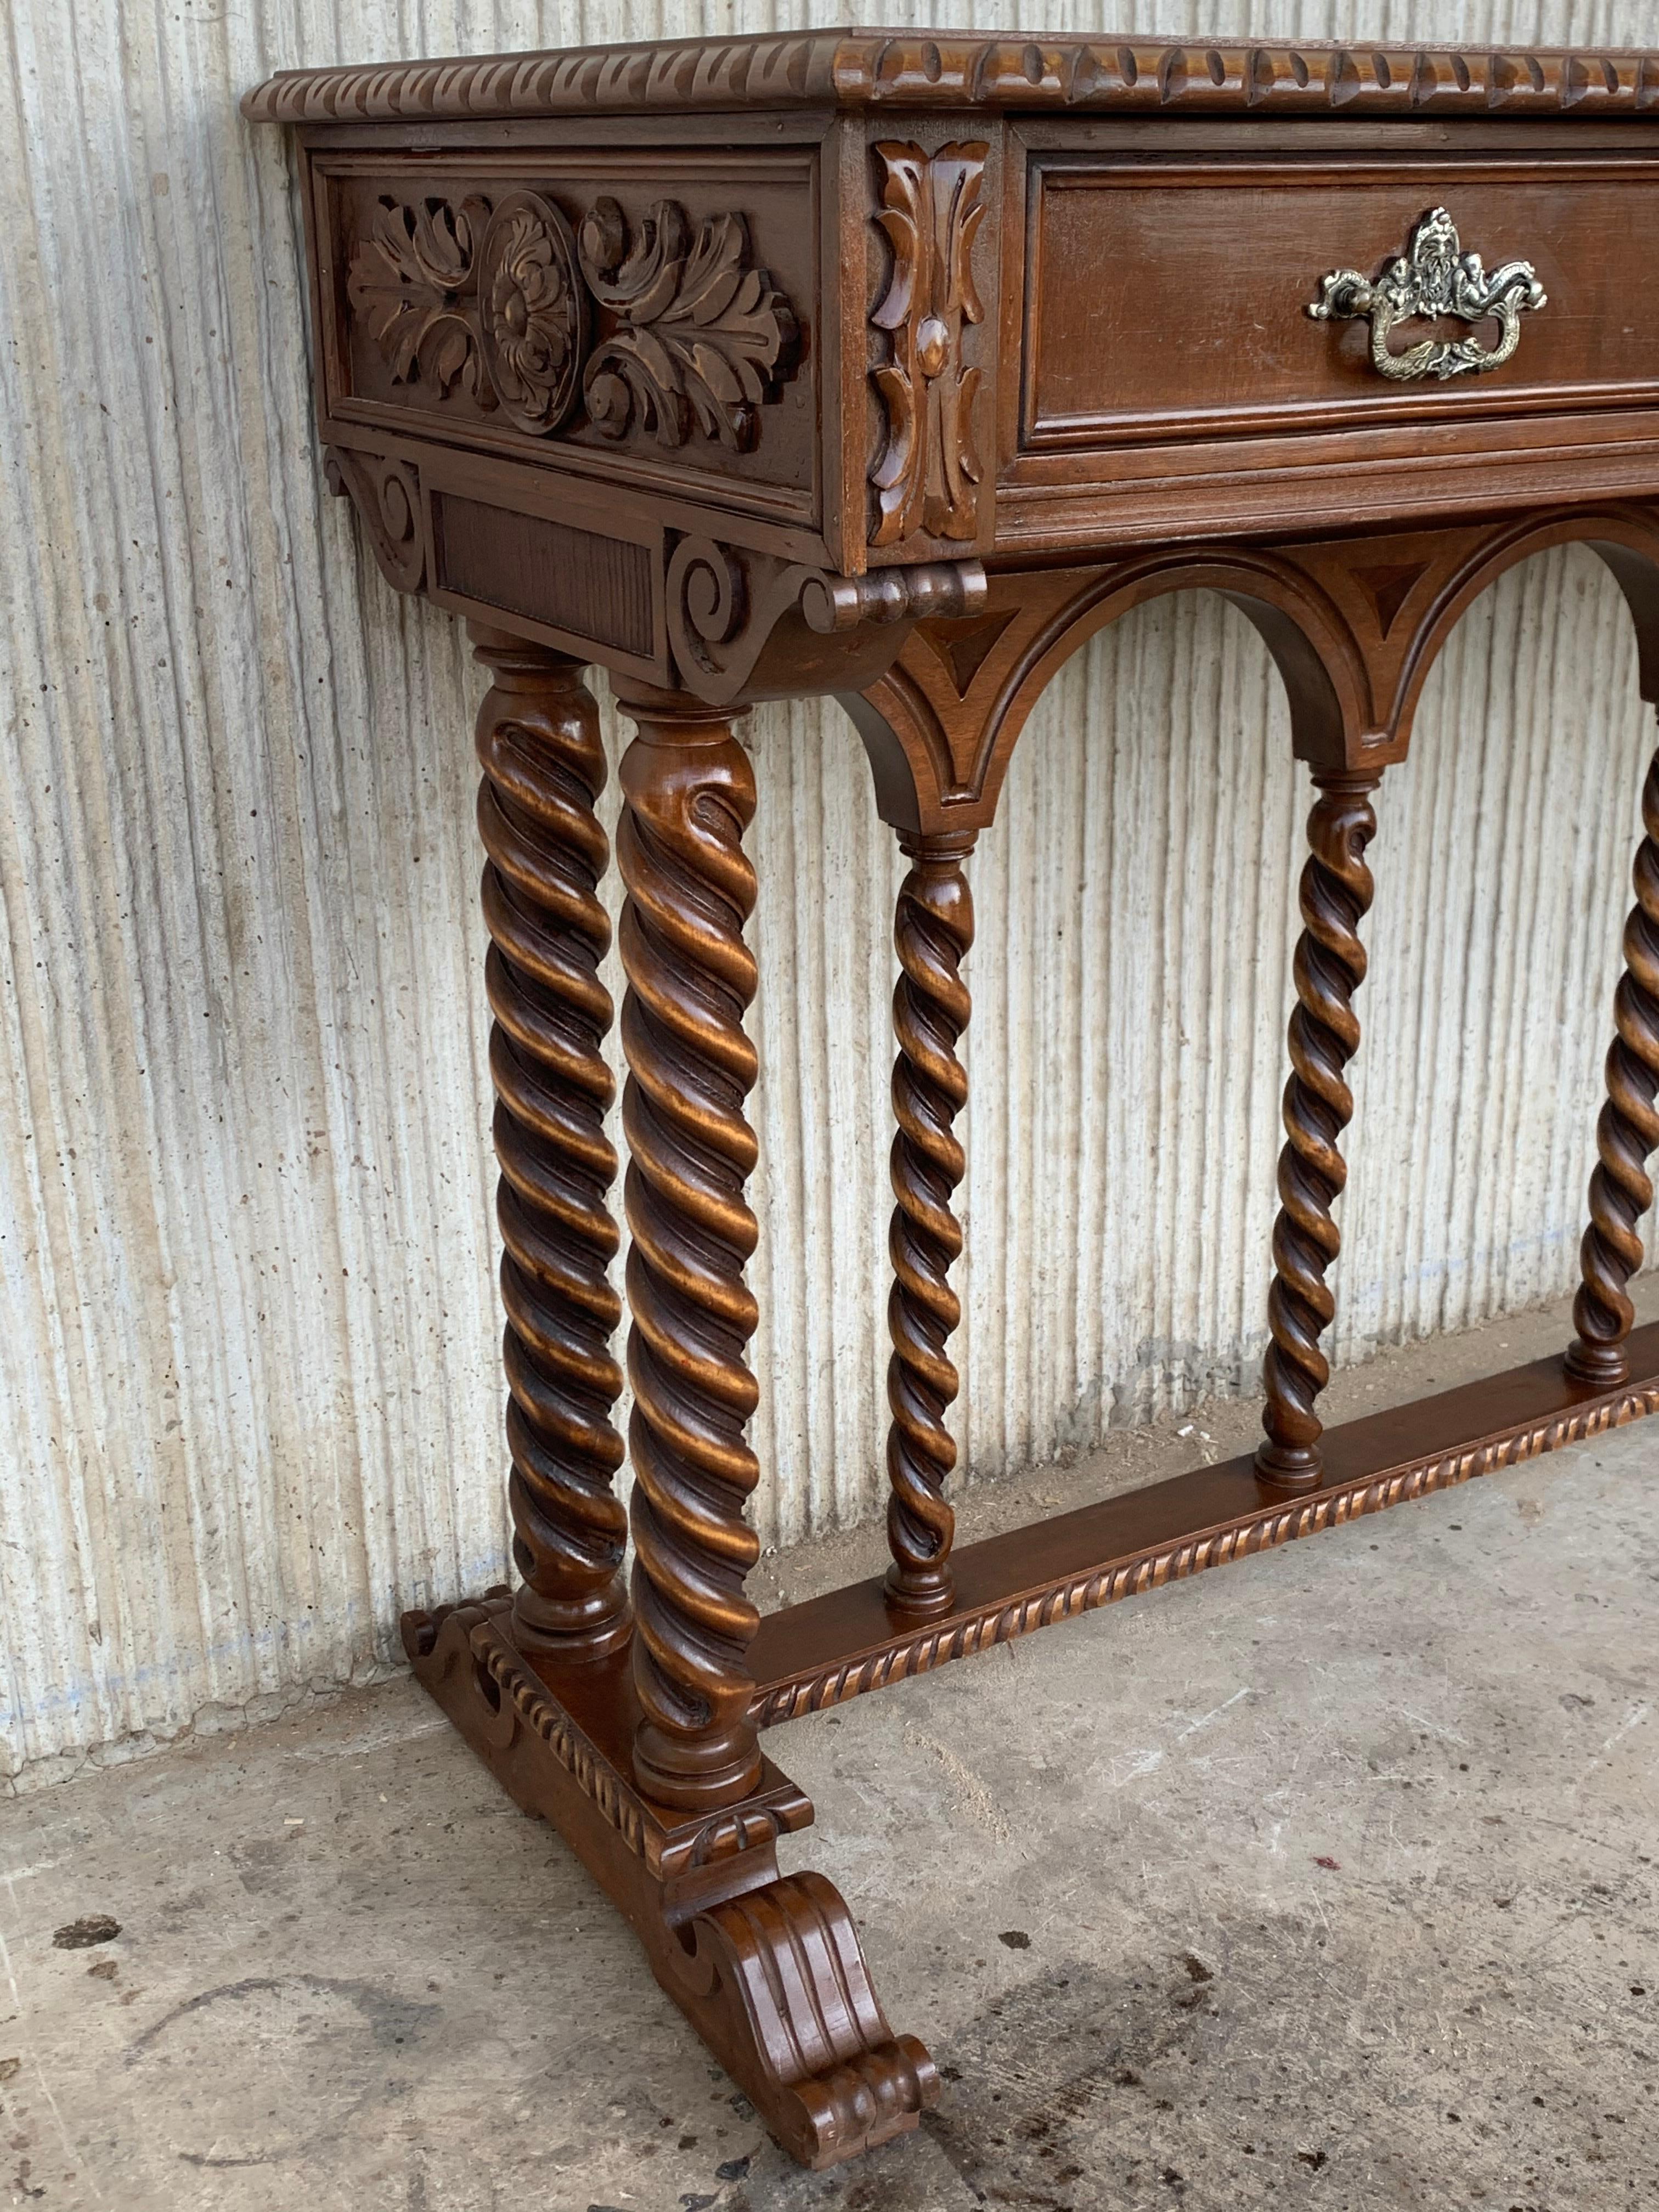 Spanish Tuscan Console Table with Three Drawers and Solomonic Columns Legs 1